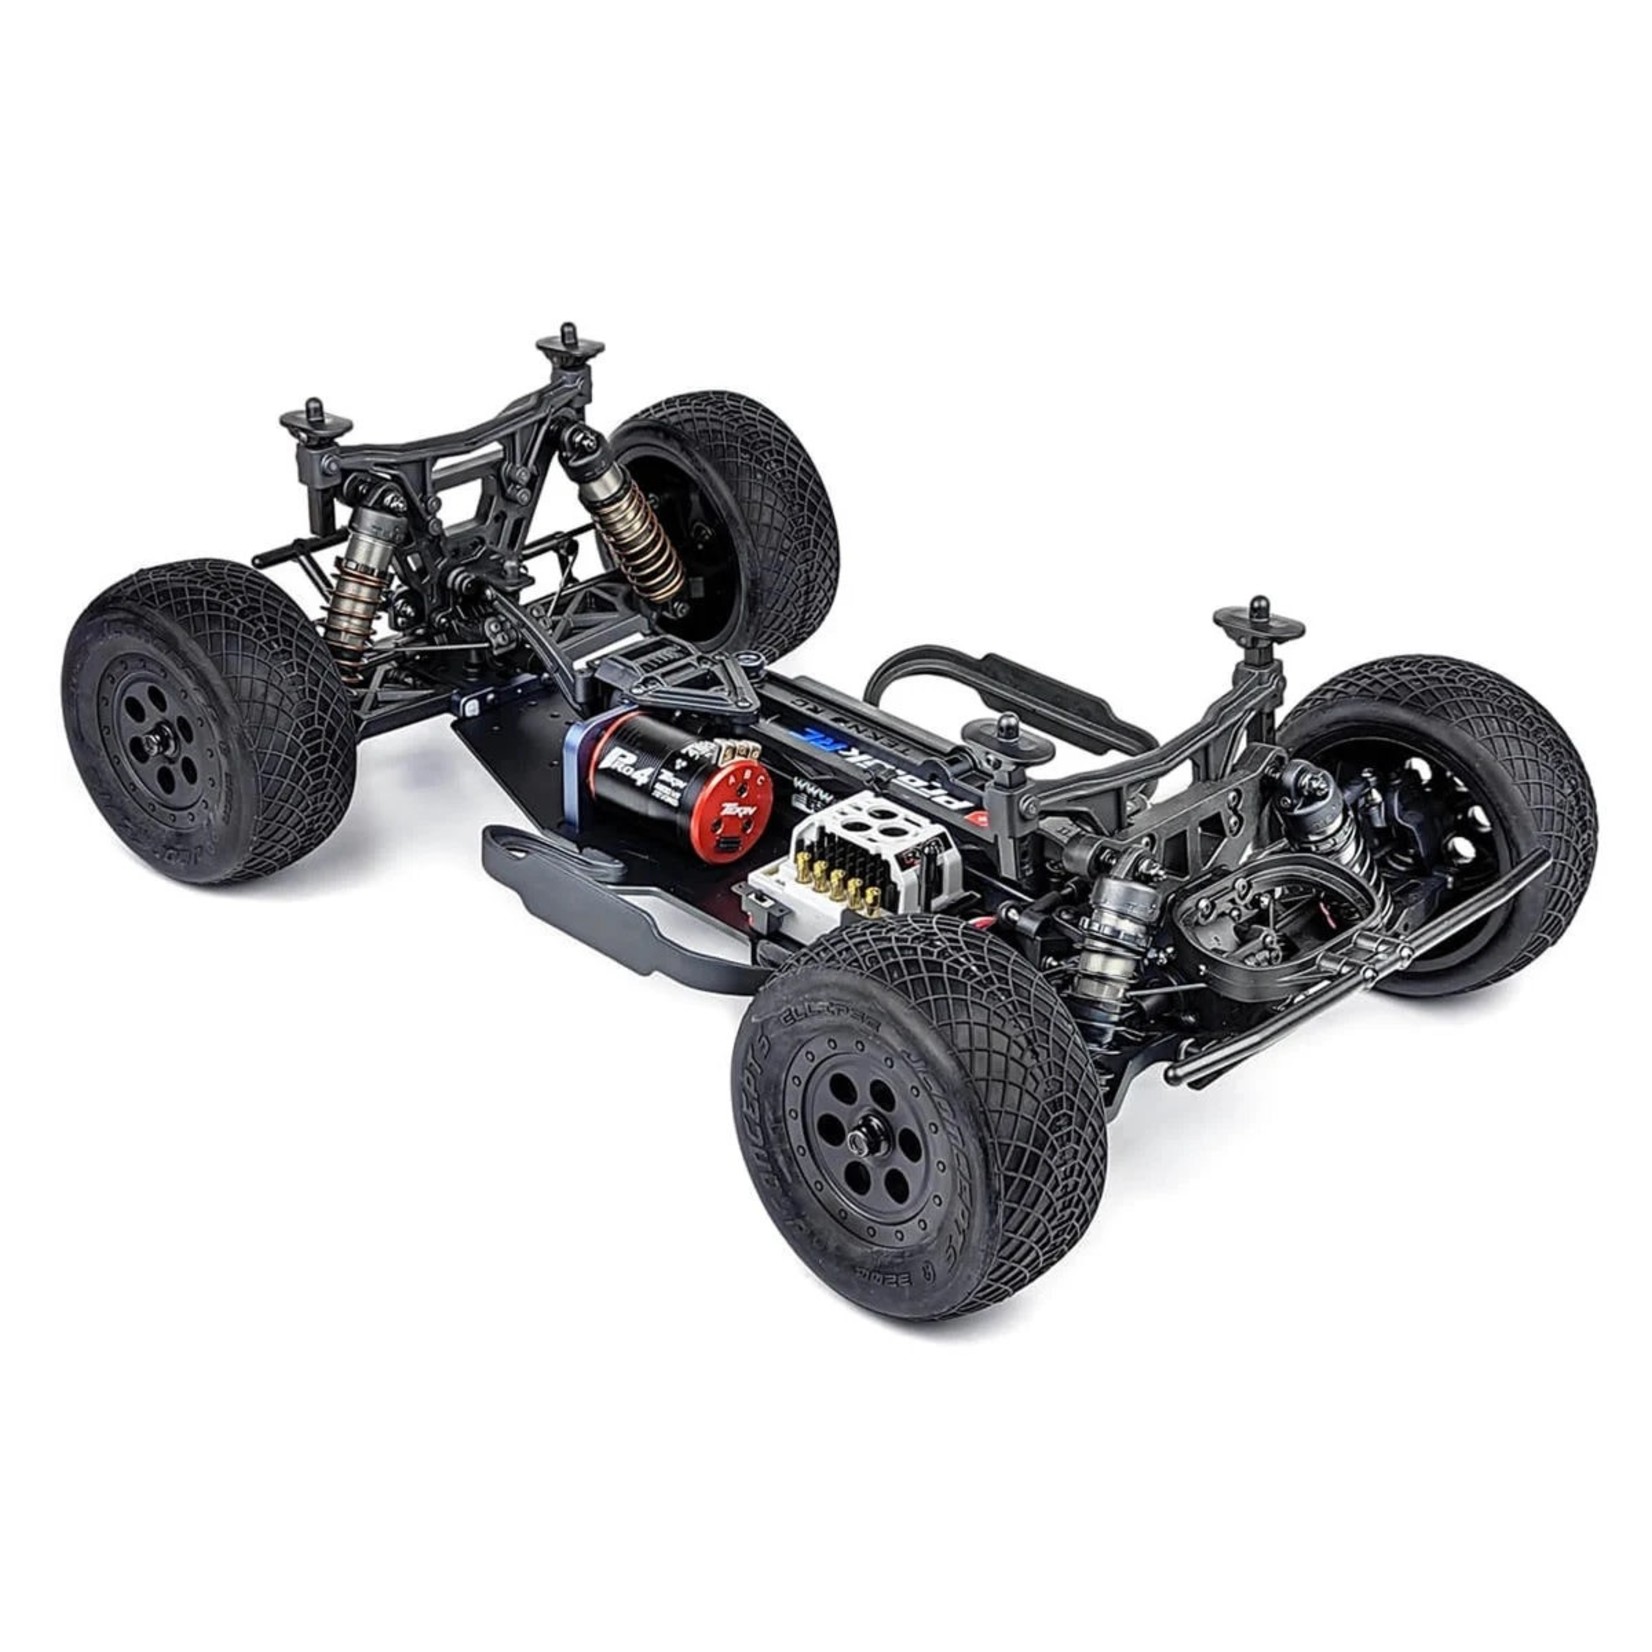 Tekno RC Tekno RC SCT410SL Lightweight 1/10 Electric 4WD Short Course Truck Kit #TKR7000